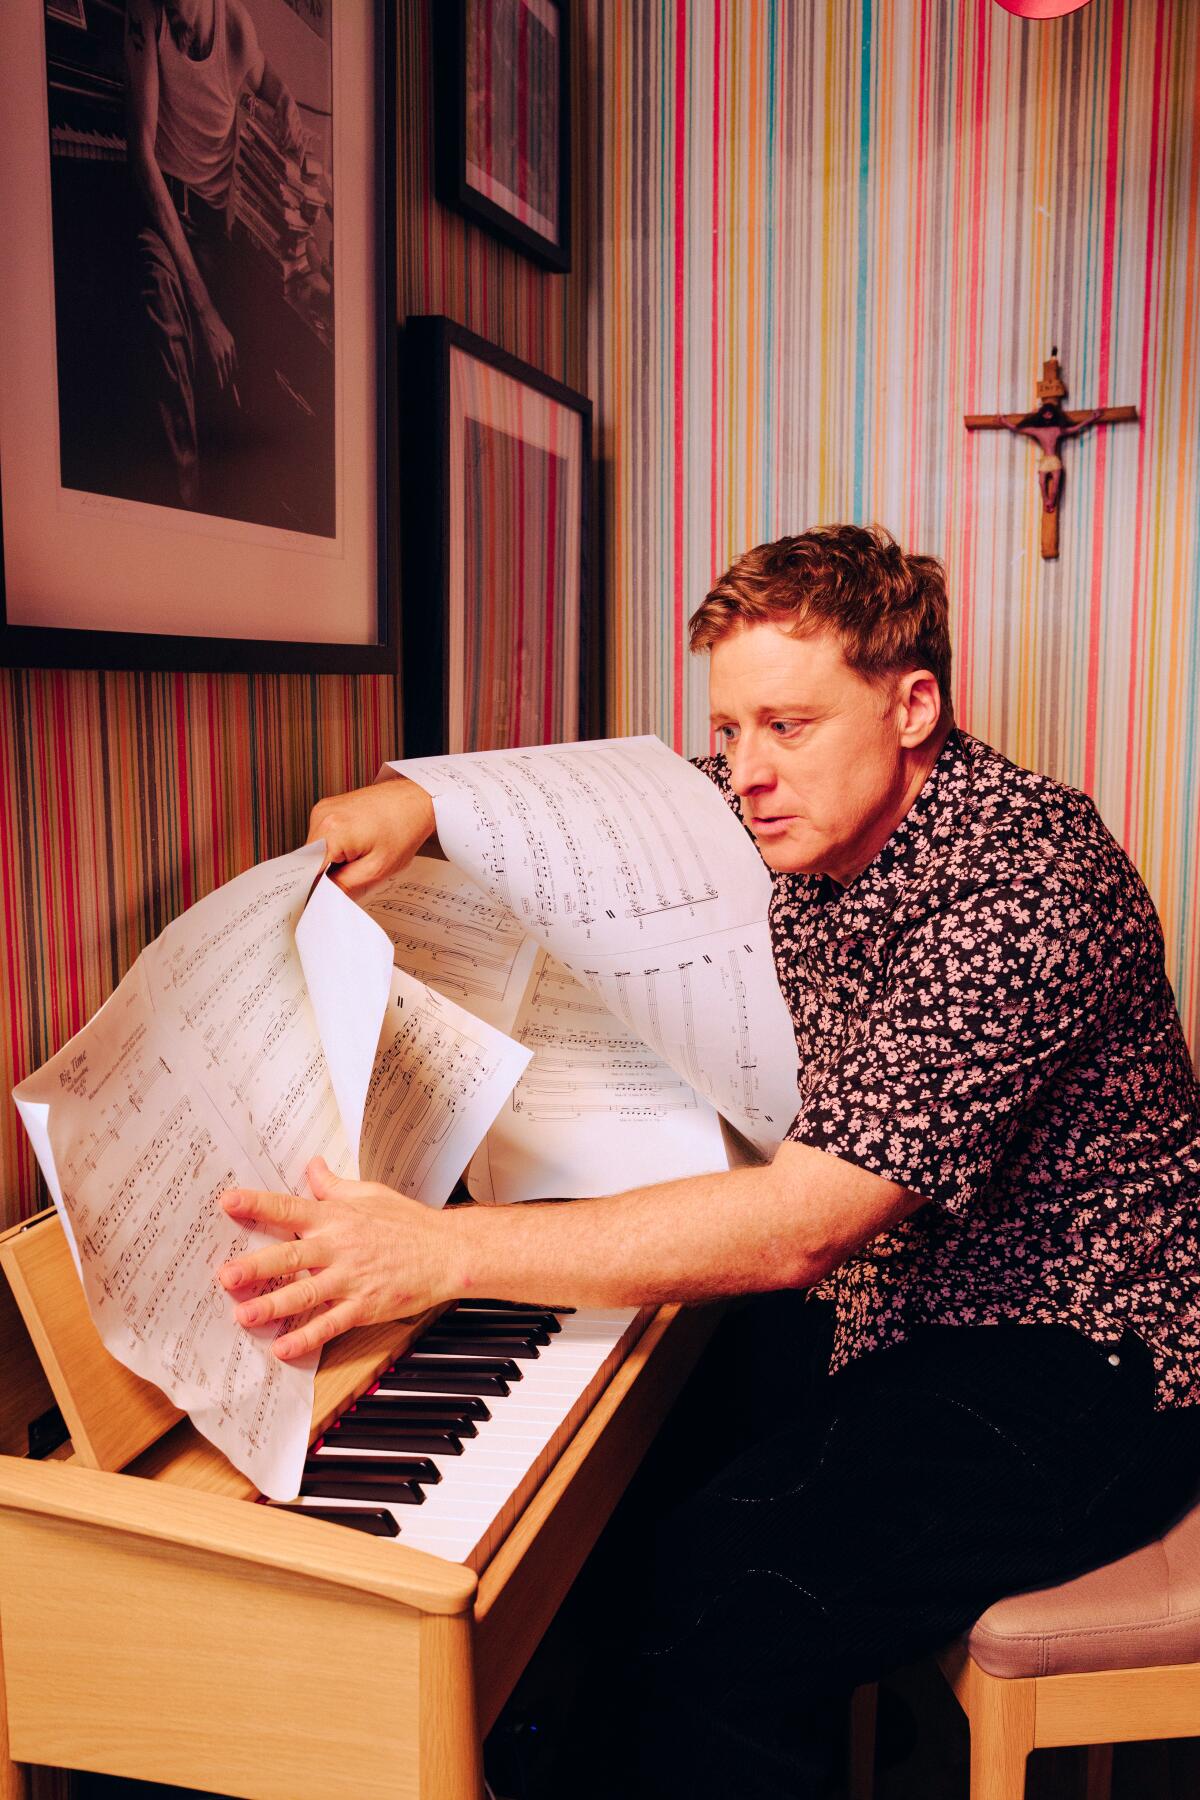 Alan Tudyk gets a little dirty with the sheet music on his home piano.